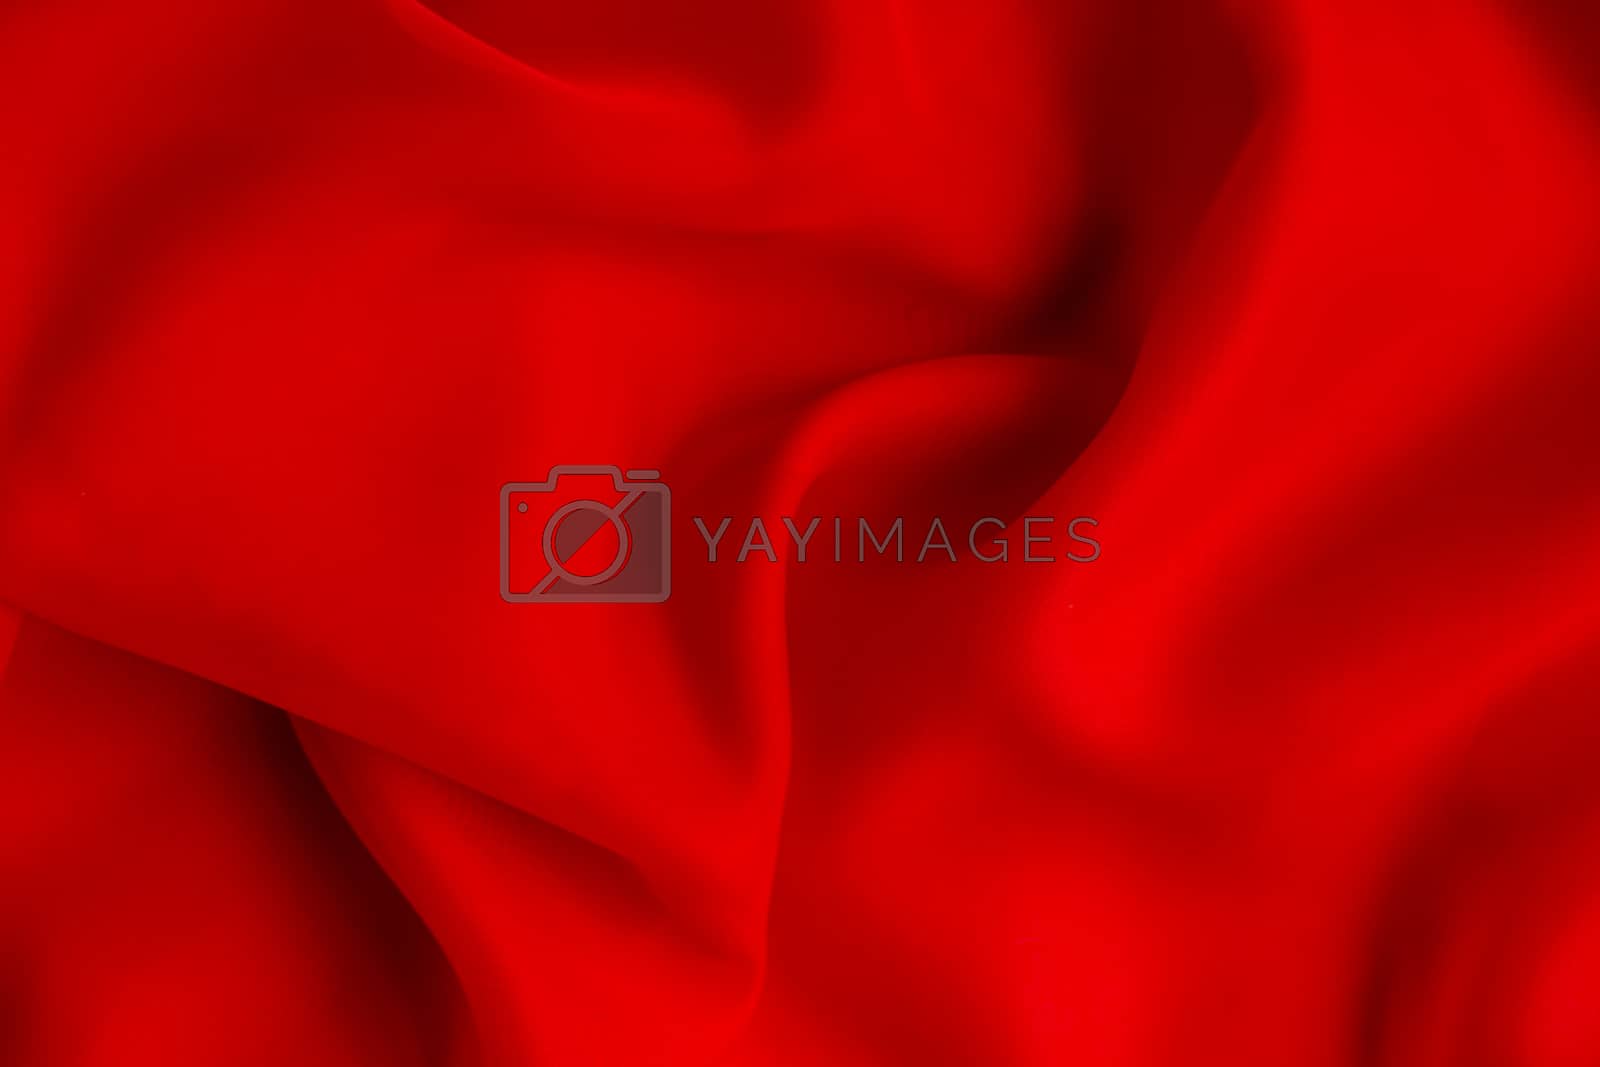 Royalty free image of Red fabric, backdrop by sergeizubkov64